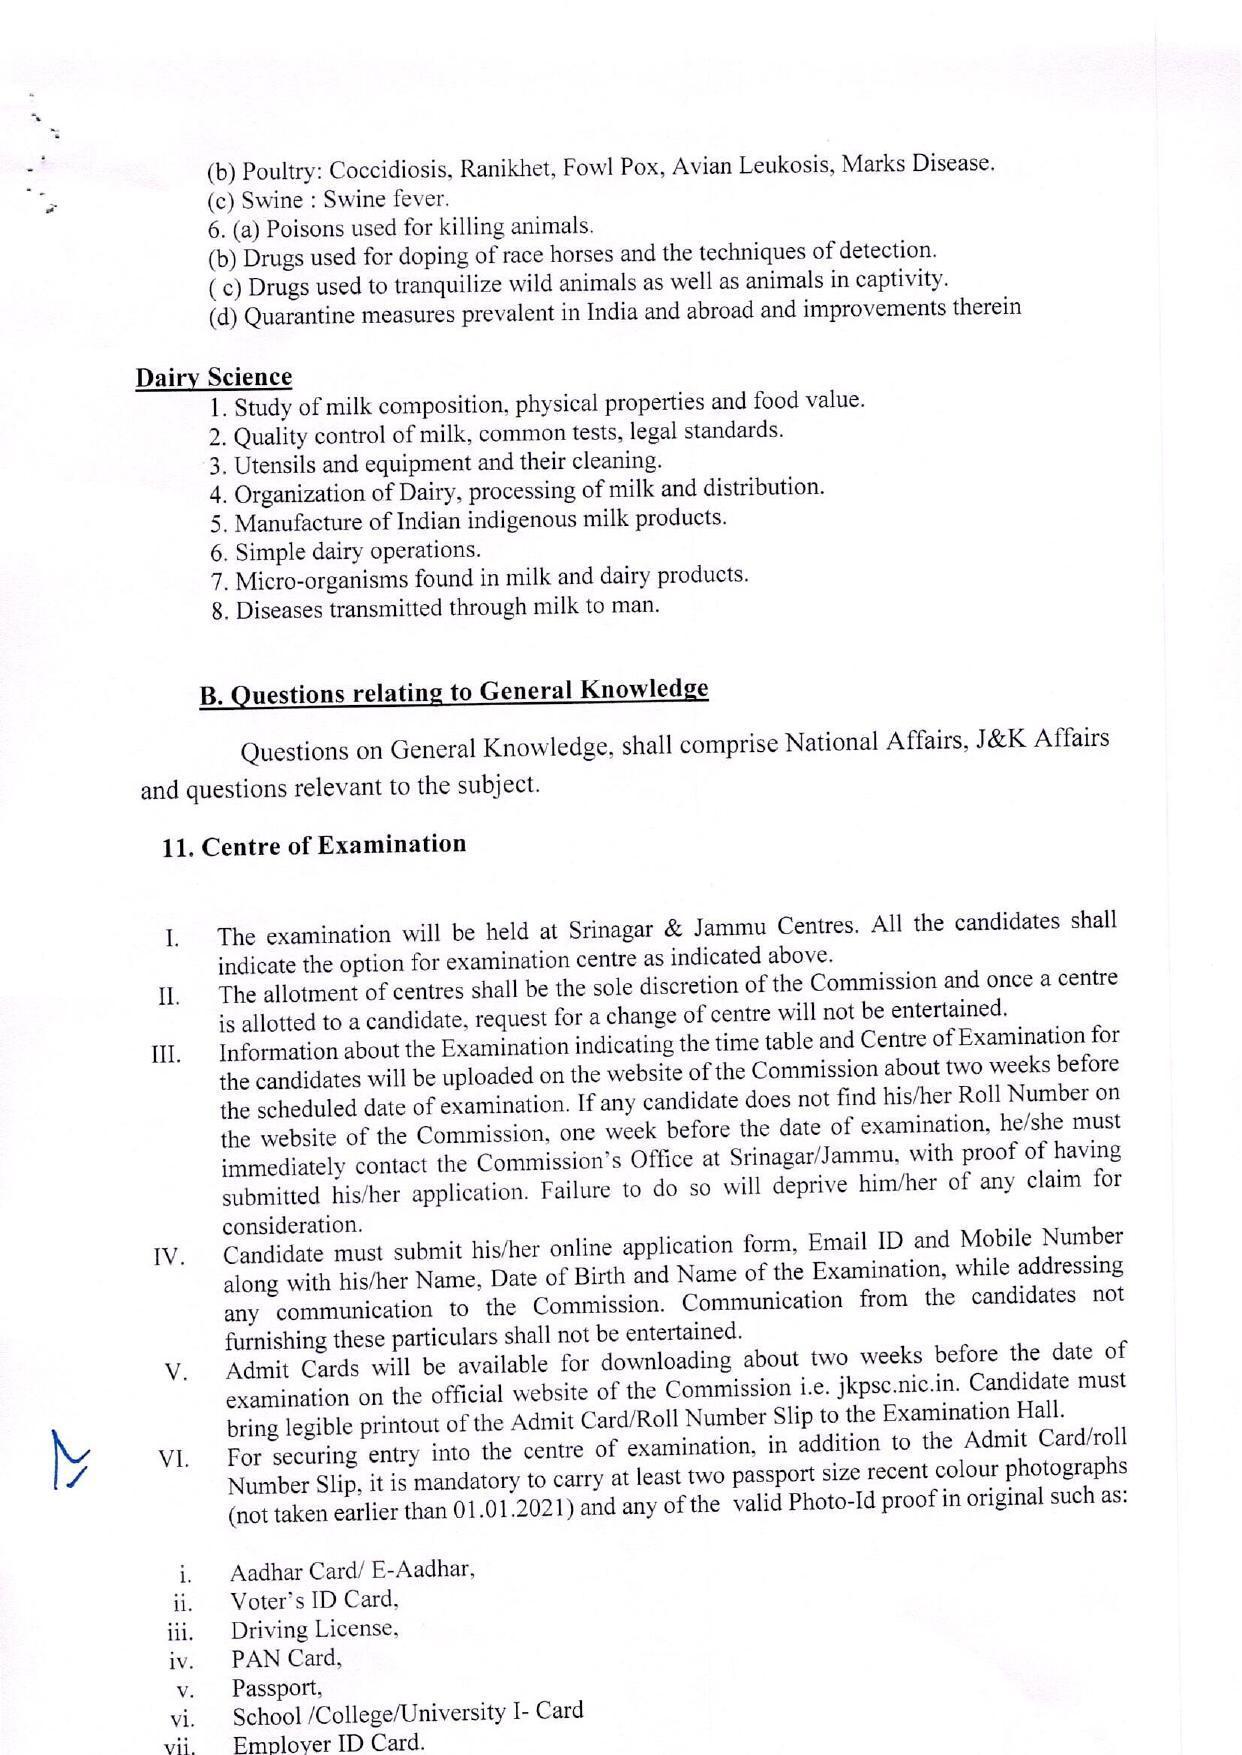 JKPSC Invites Application for 23 Veterinary Assistant Surgeon Recruitment 2023 - Page 5